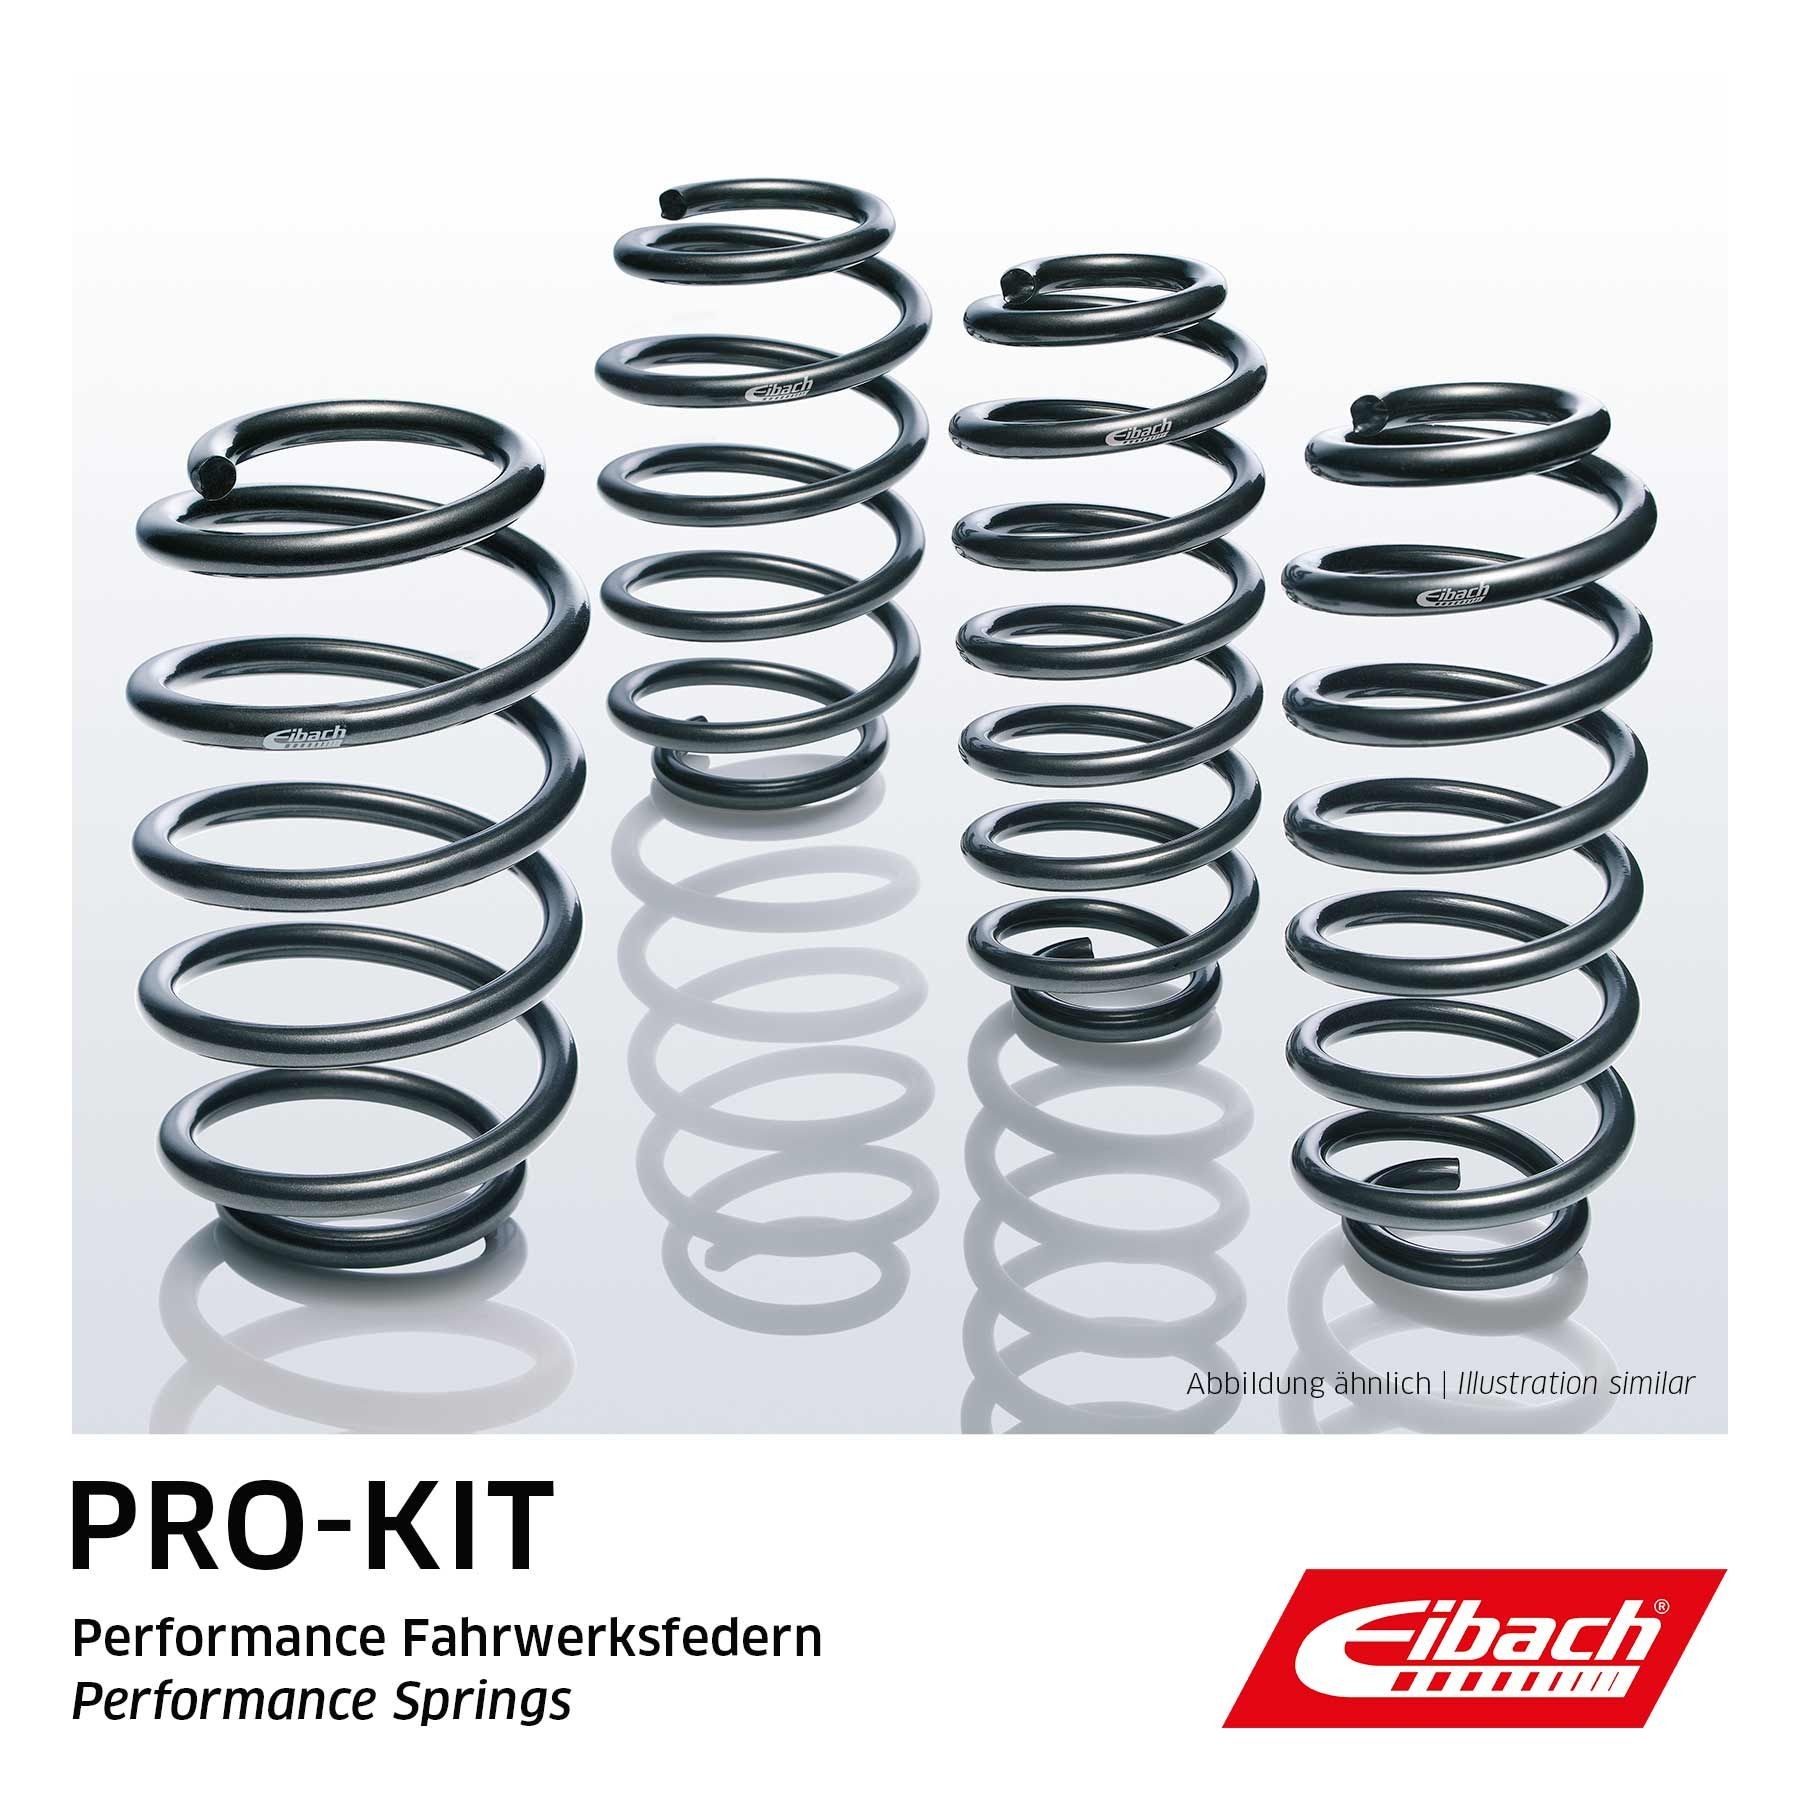 Suspension kit, coil springs 8560140 EIBACH E8560-140 - Tuning spare parts order